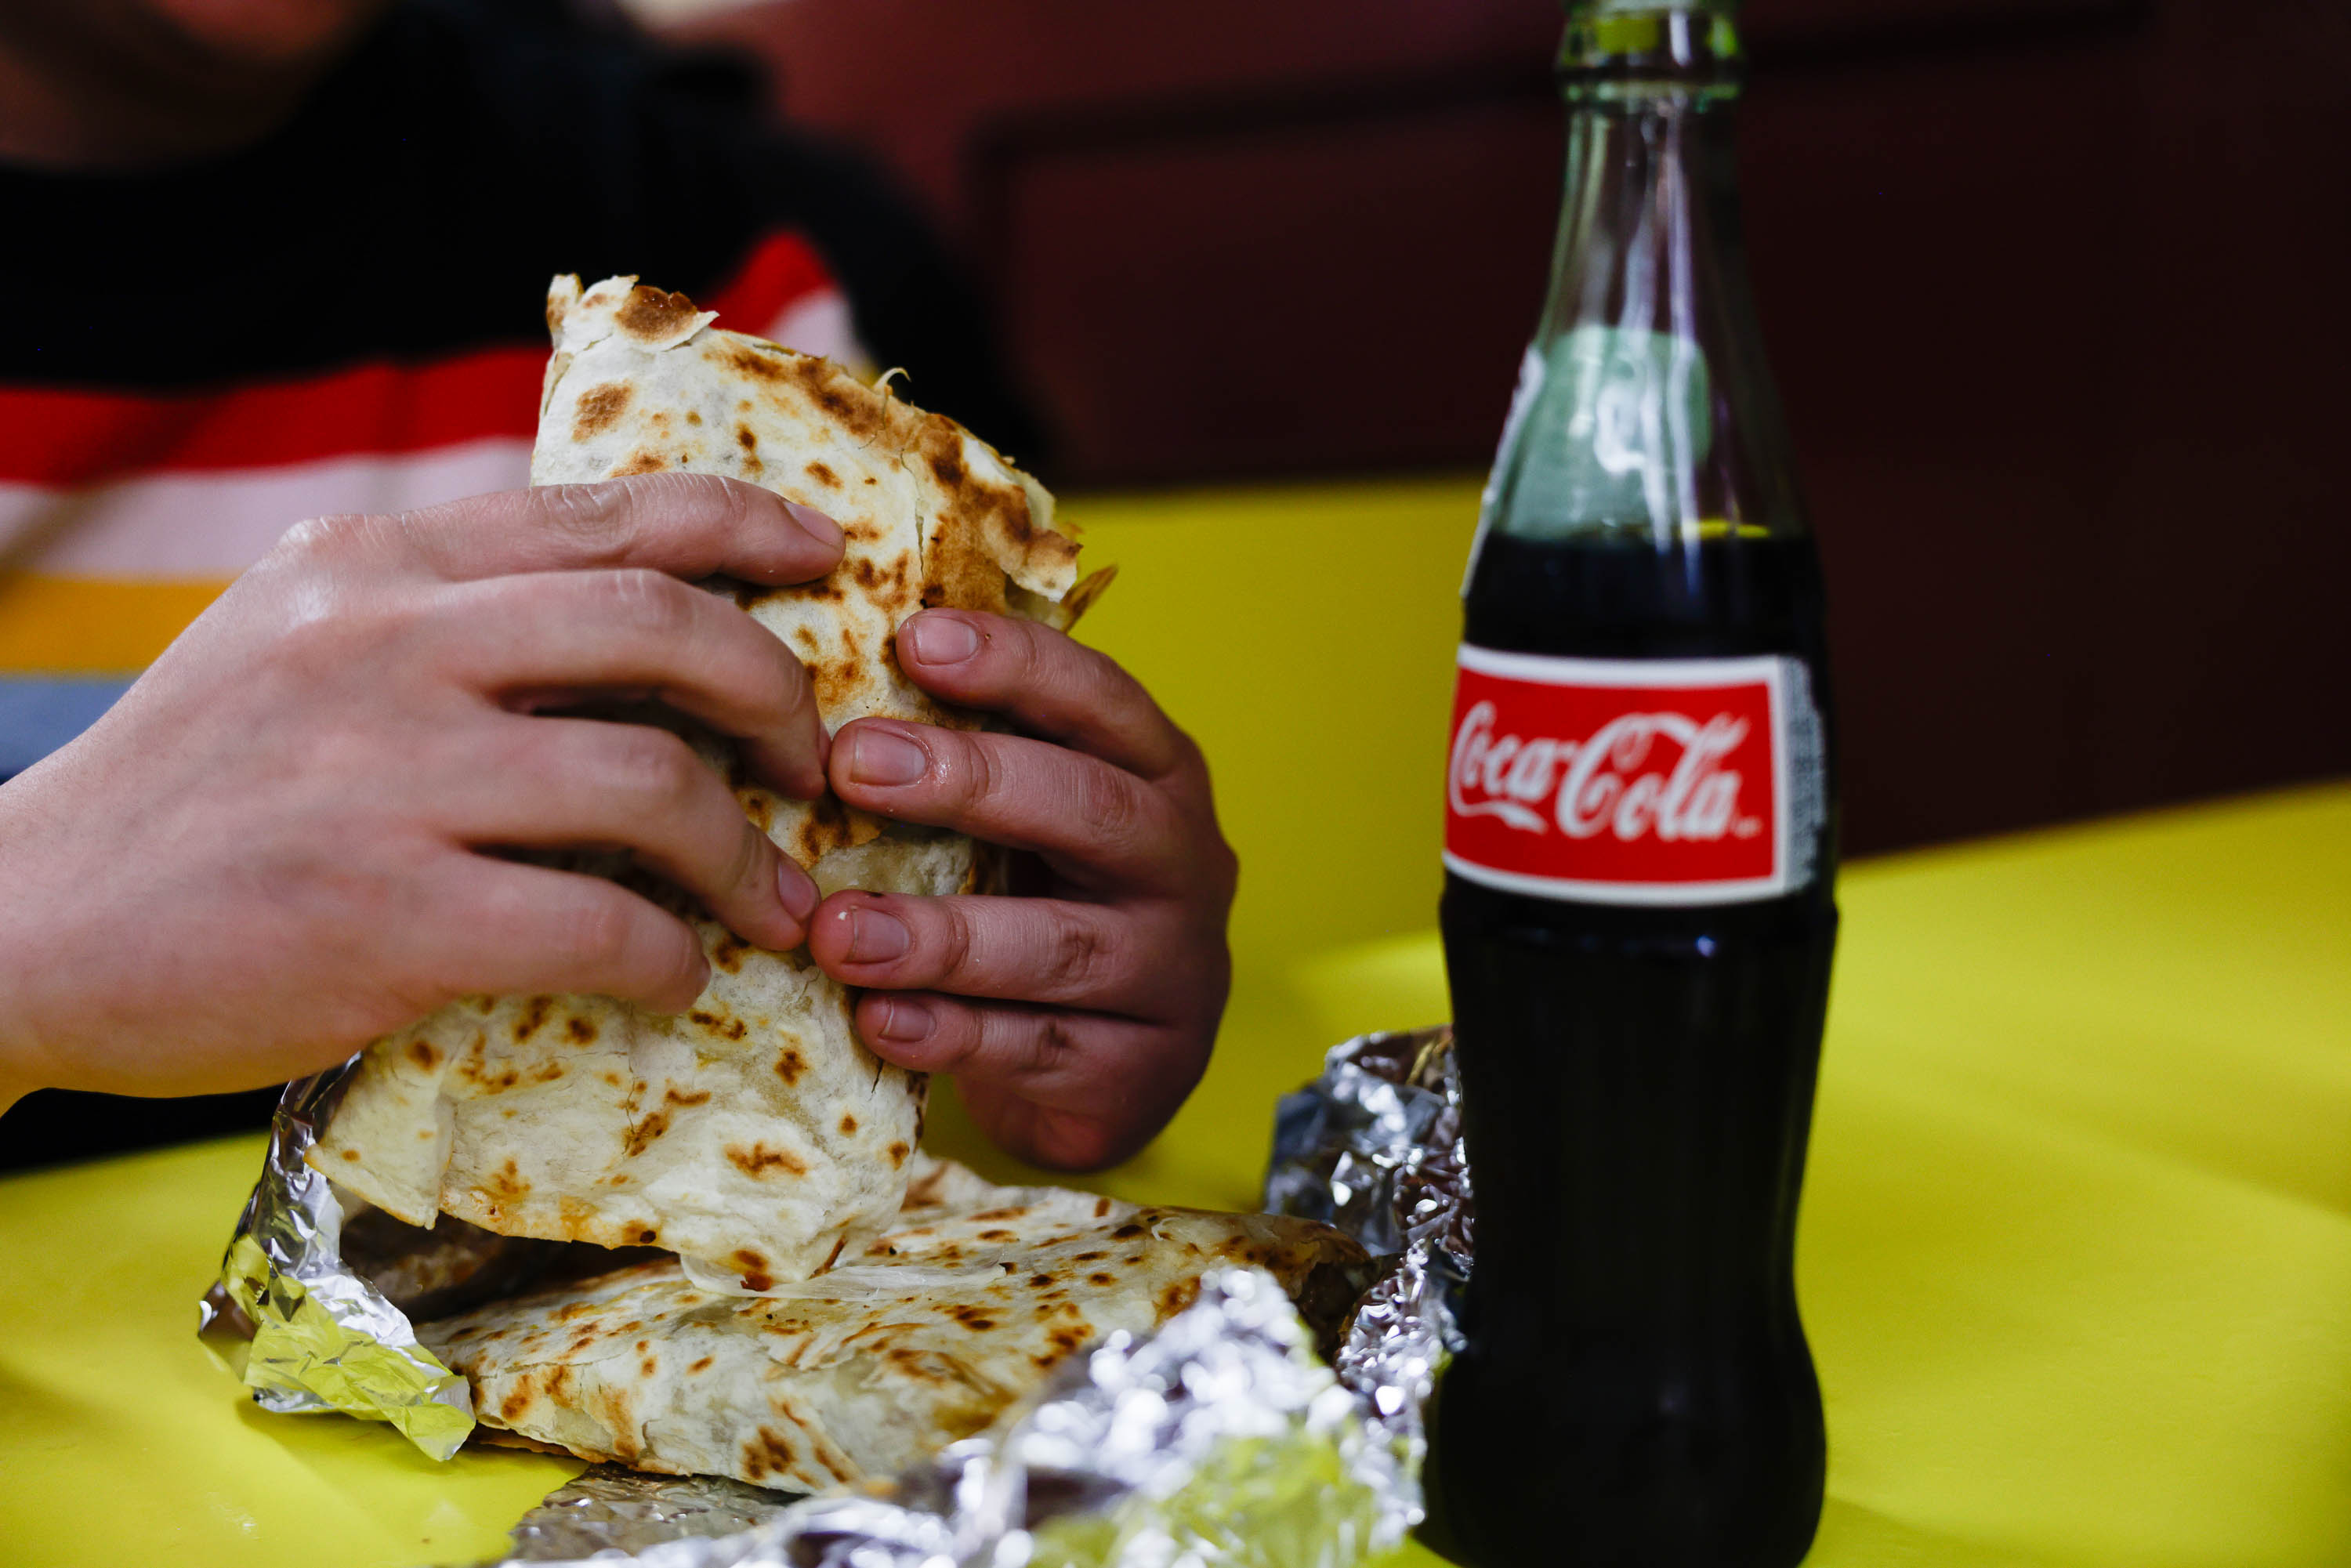 Hands holding a quesadilla with a Coca-Cola bottle on a yellow table.